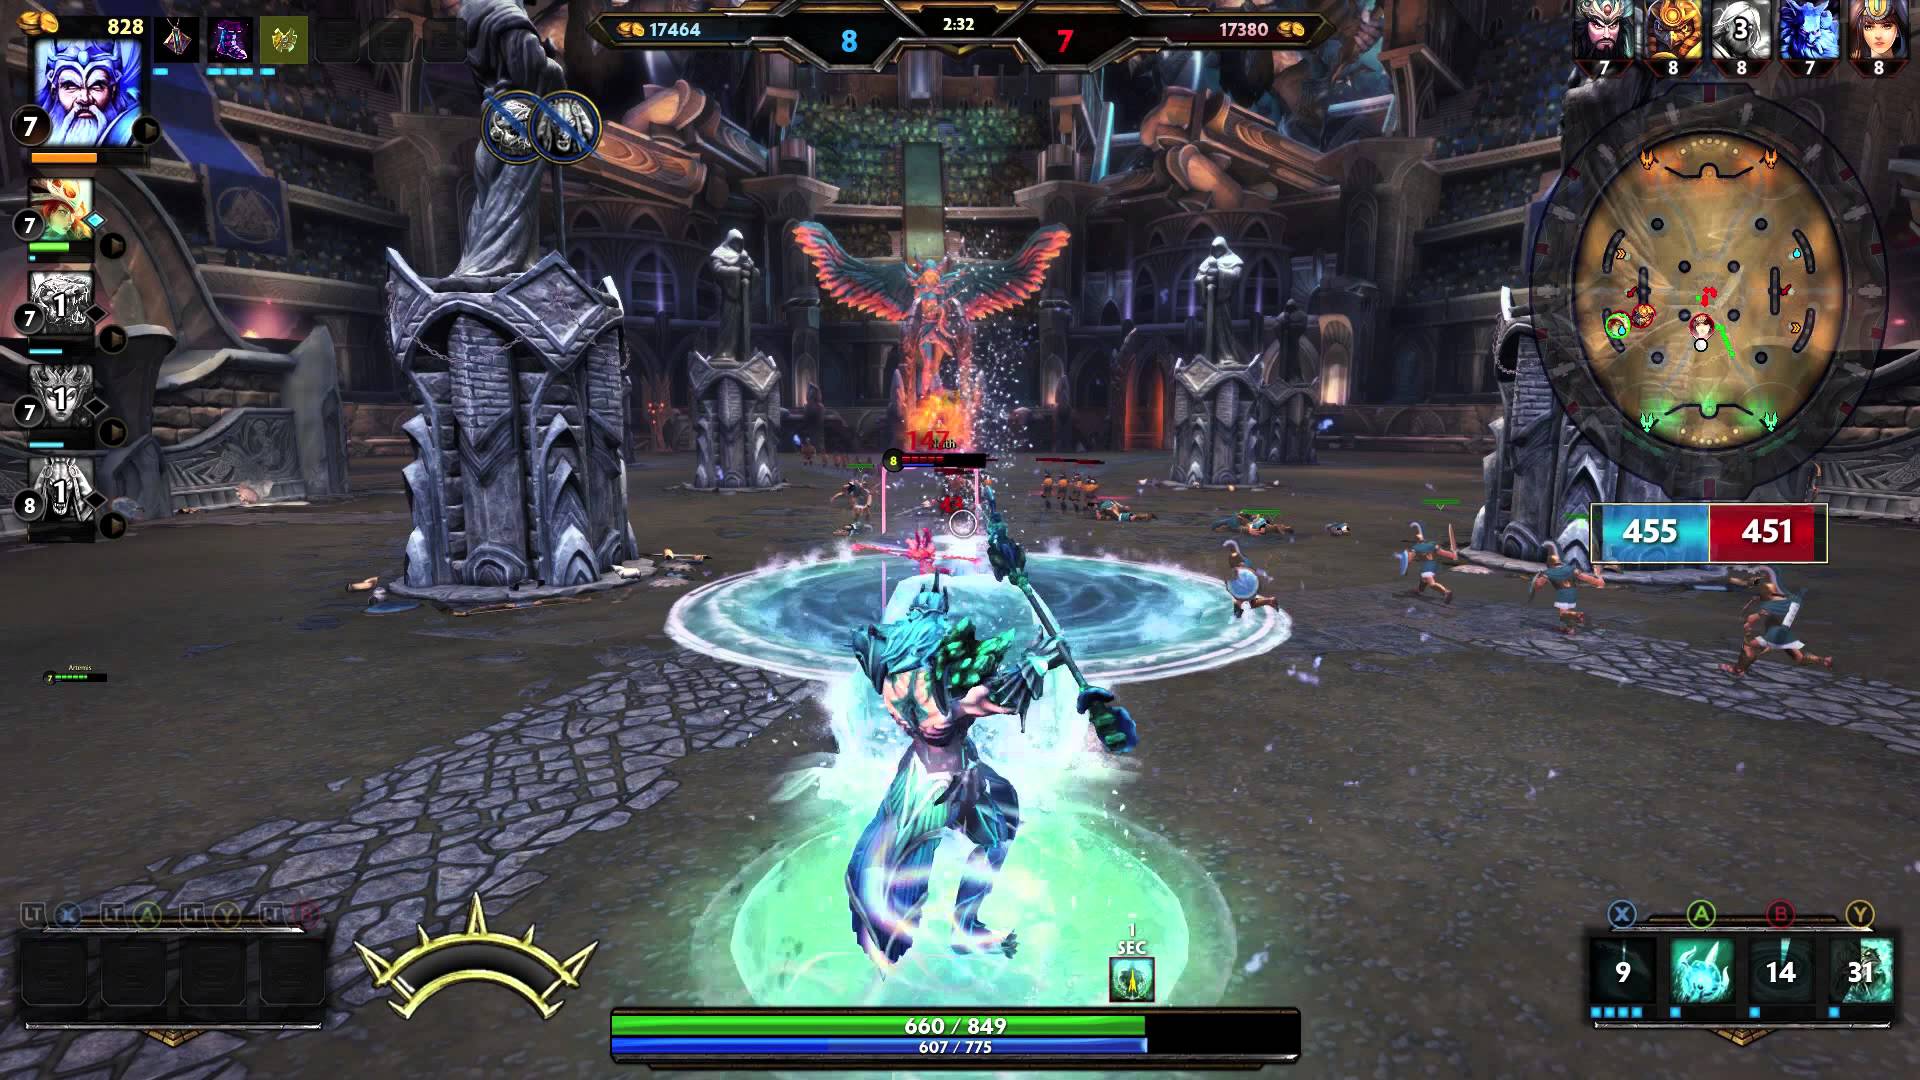 udvide Fortløbende foran SMITE is Coming to PS4! Closed Beta Starts in March - mxdwn Games